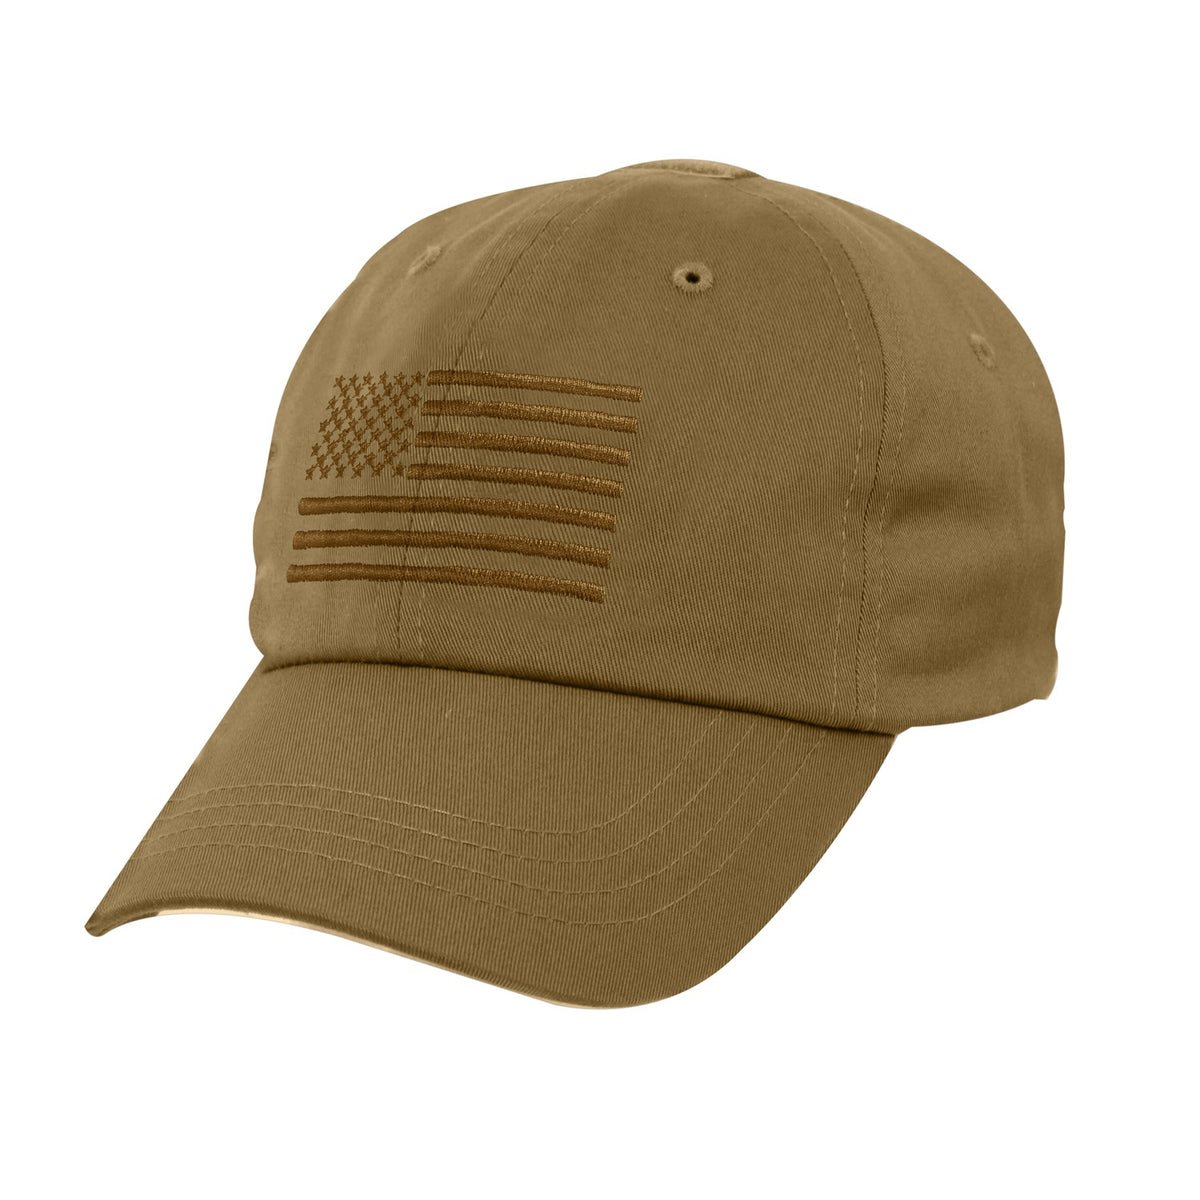 Rothco Tactical Operator Cap With U.S. Flag Coyote Brown